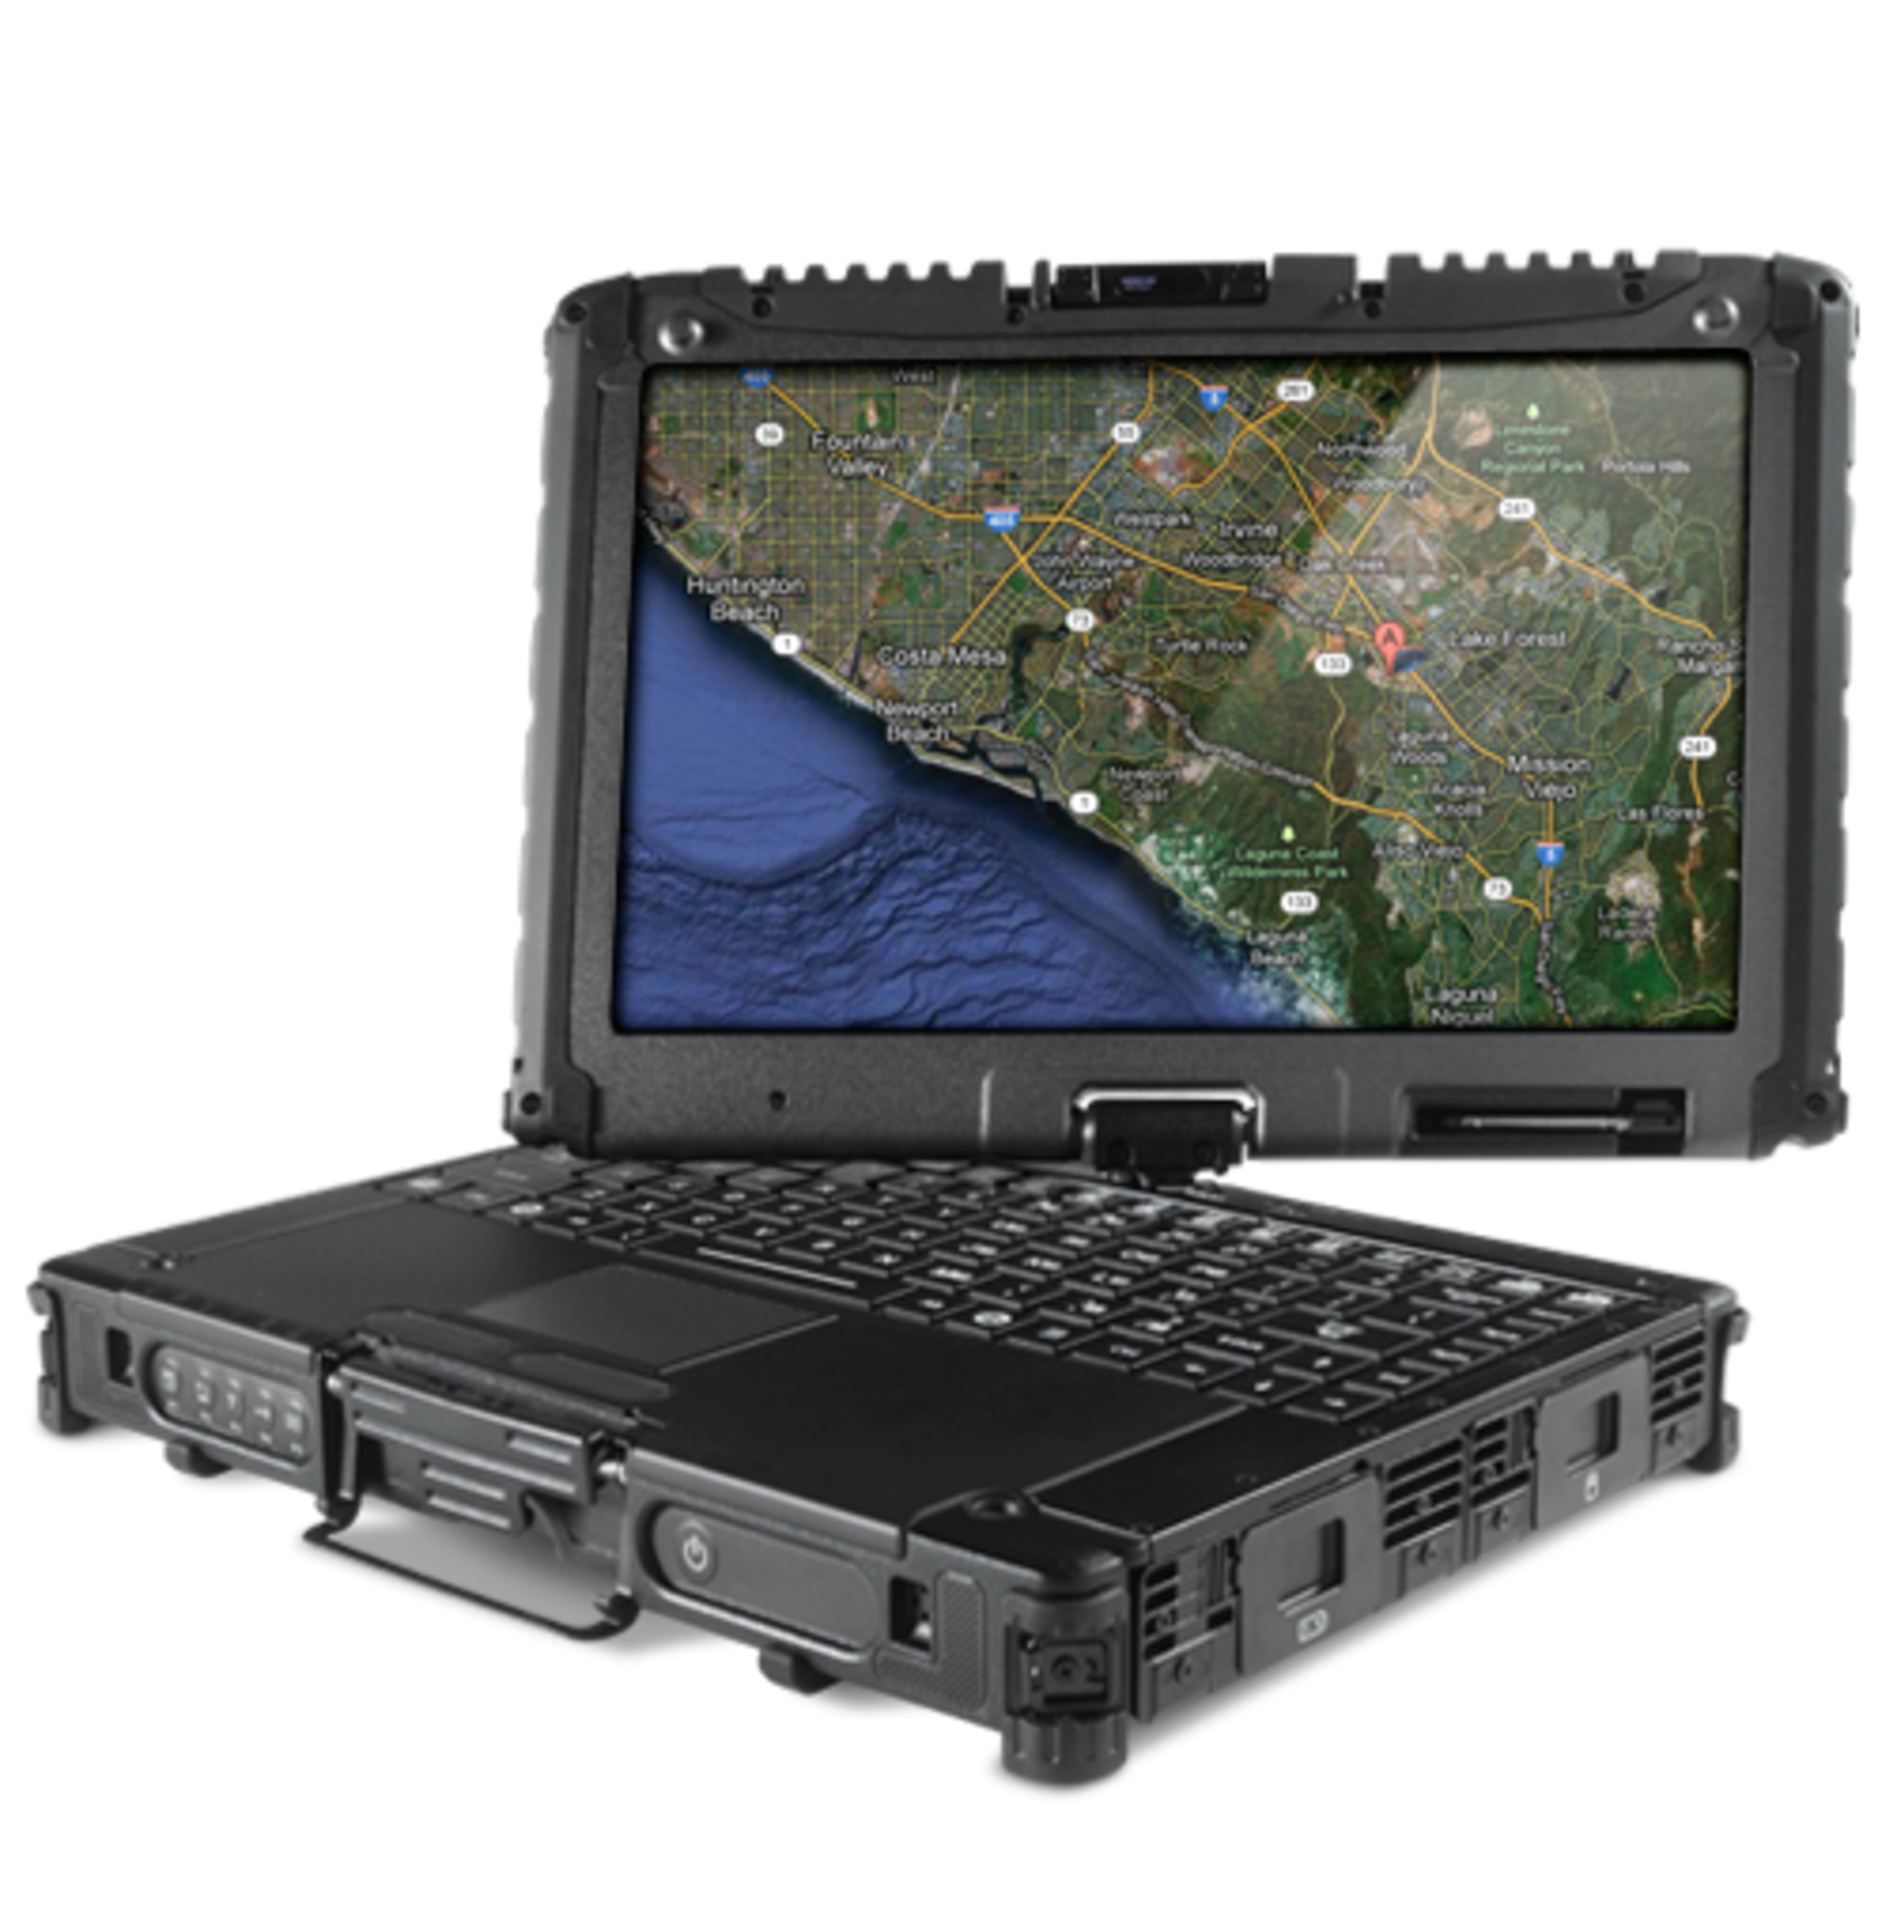 1 x Getac V200 Rugged Laptop Computer - Rugged Laptop That Transforms into a Tablet PC - Features an - Image 2 of 10